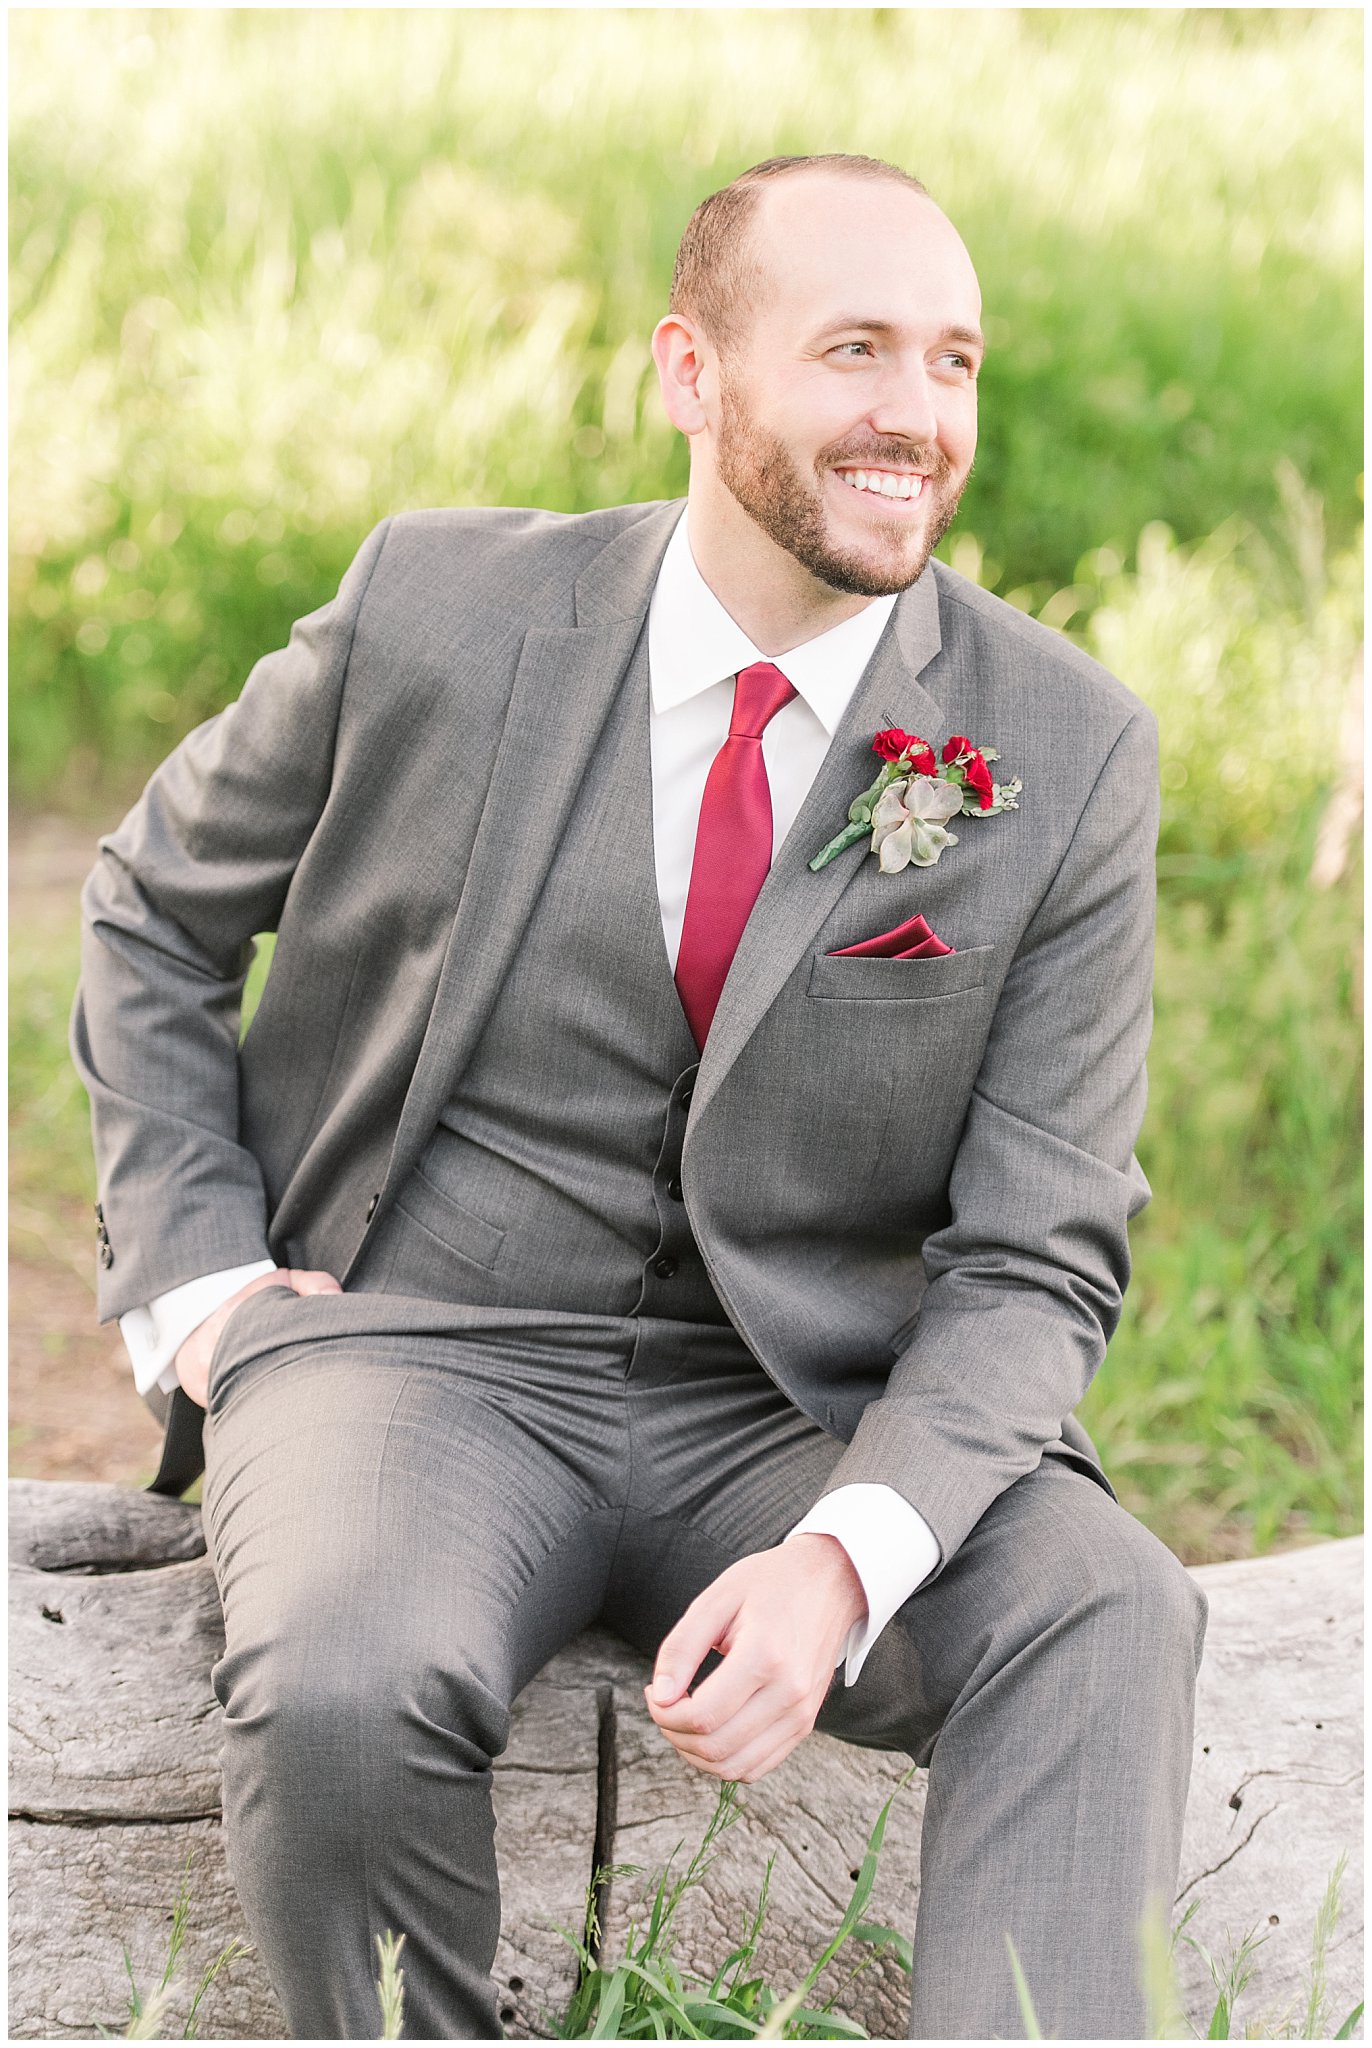 Groom portraits in the mountains | Groom in grey suit and bride in beige and white dress | Snowbasin Summer Formal Session | Utah Wedding Photographers | Jessie and Dallin